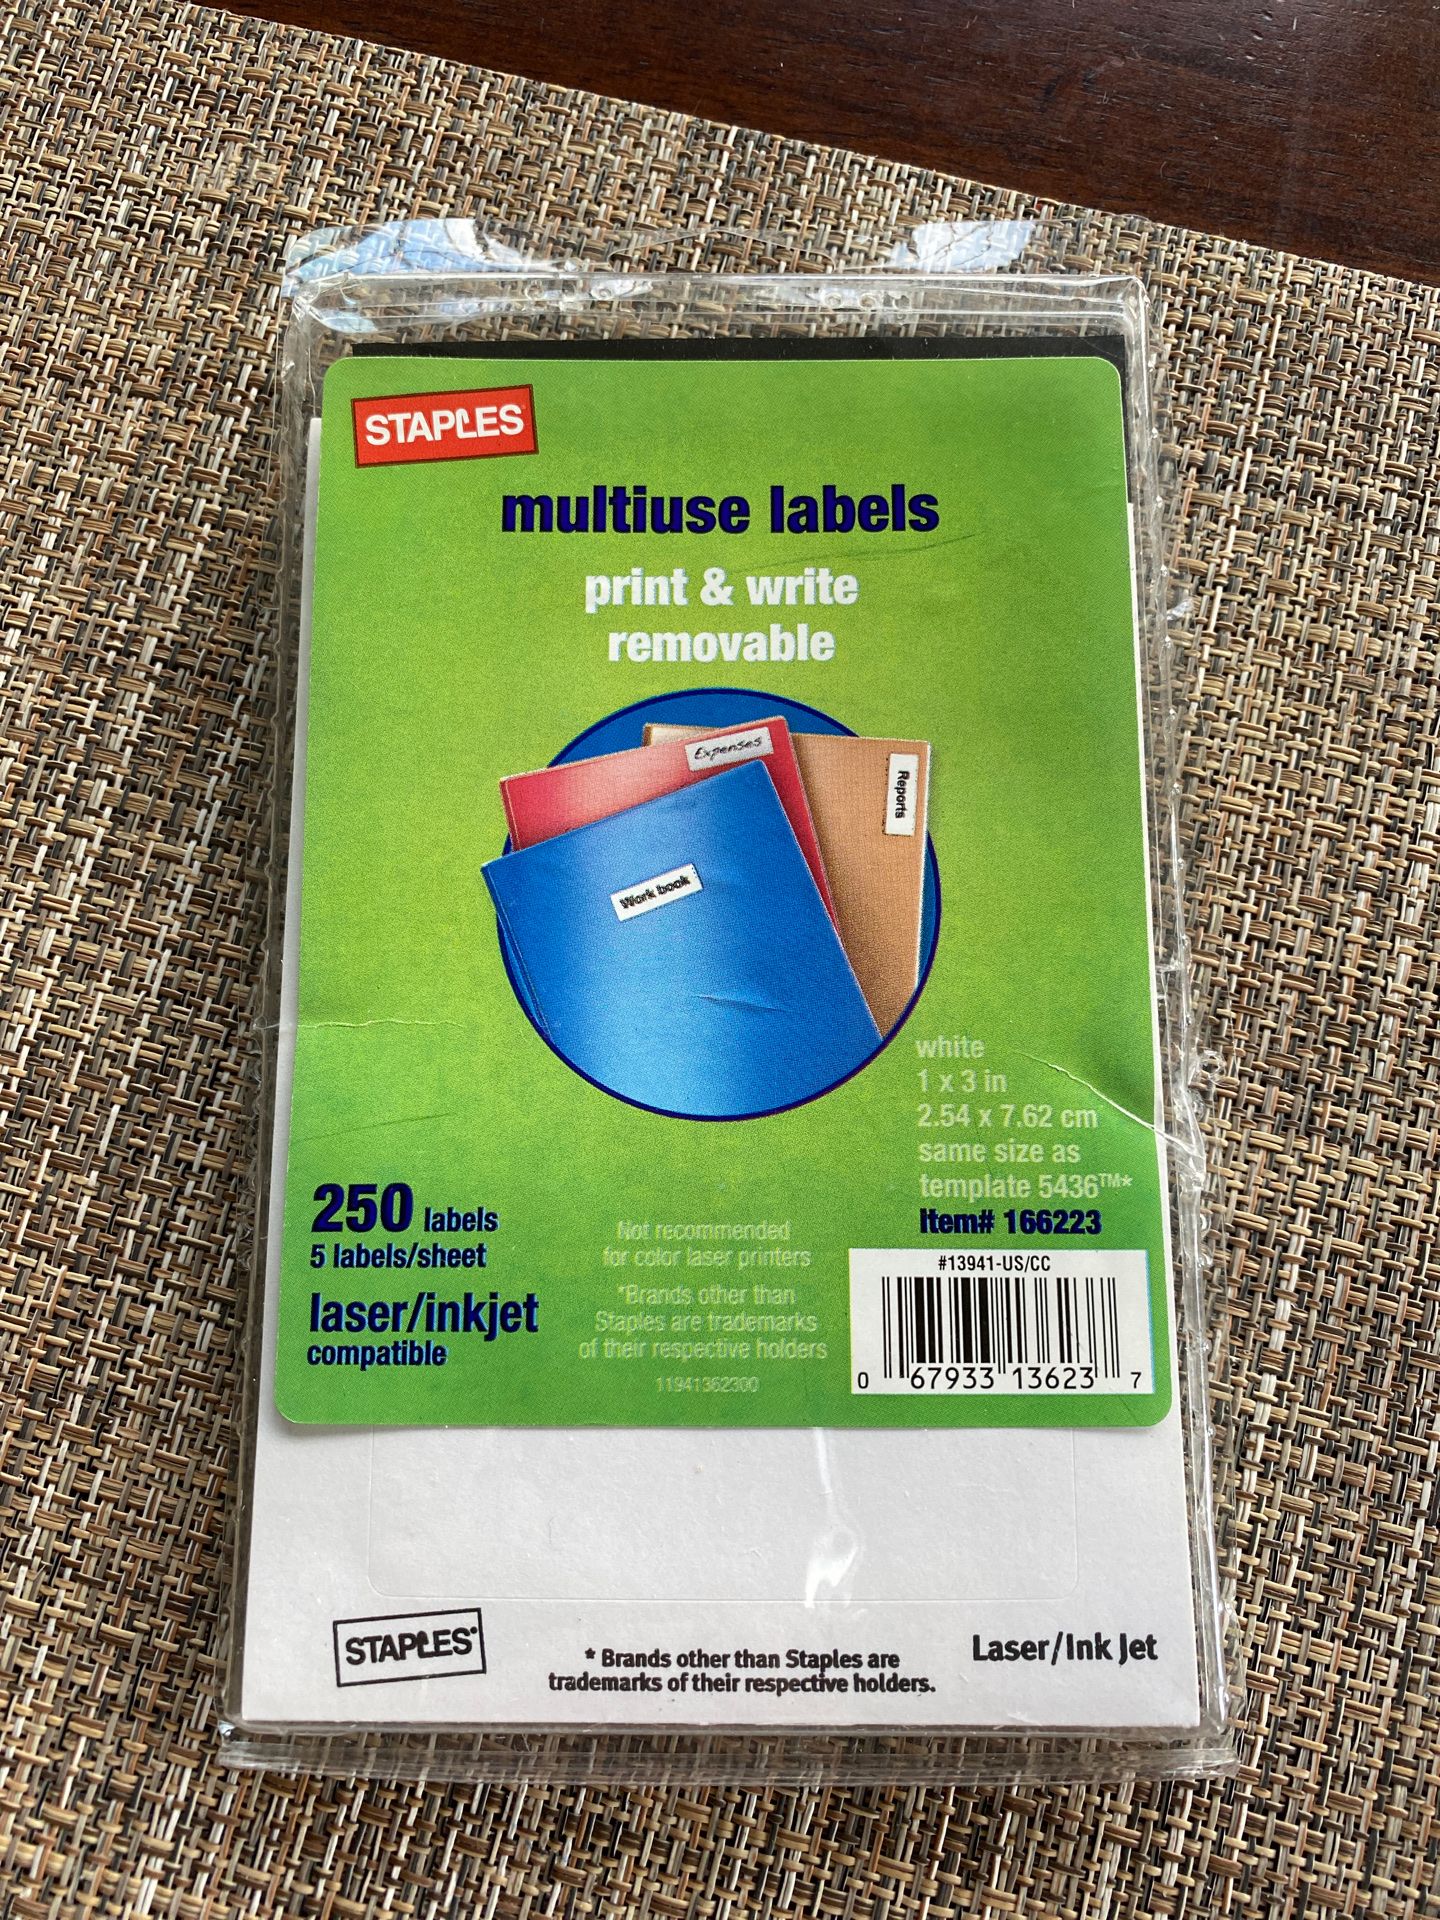 Staples multi-use labels